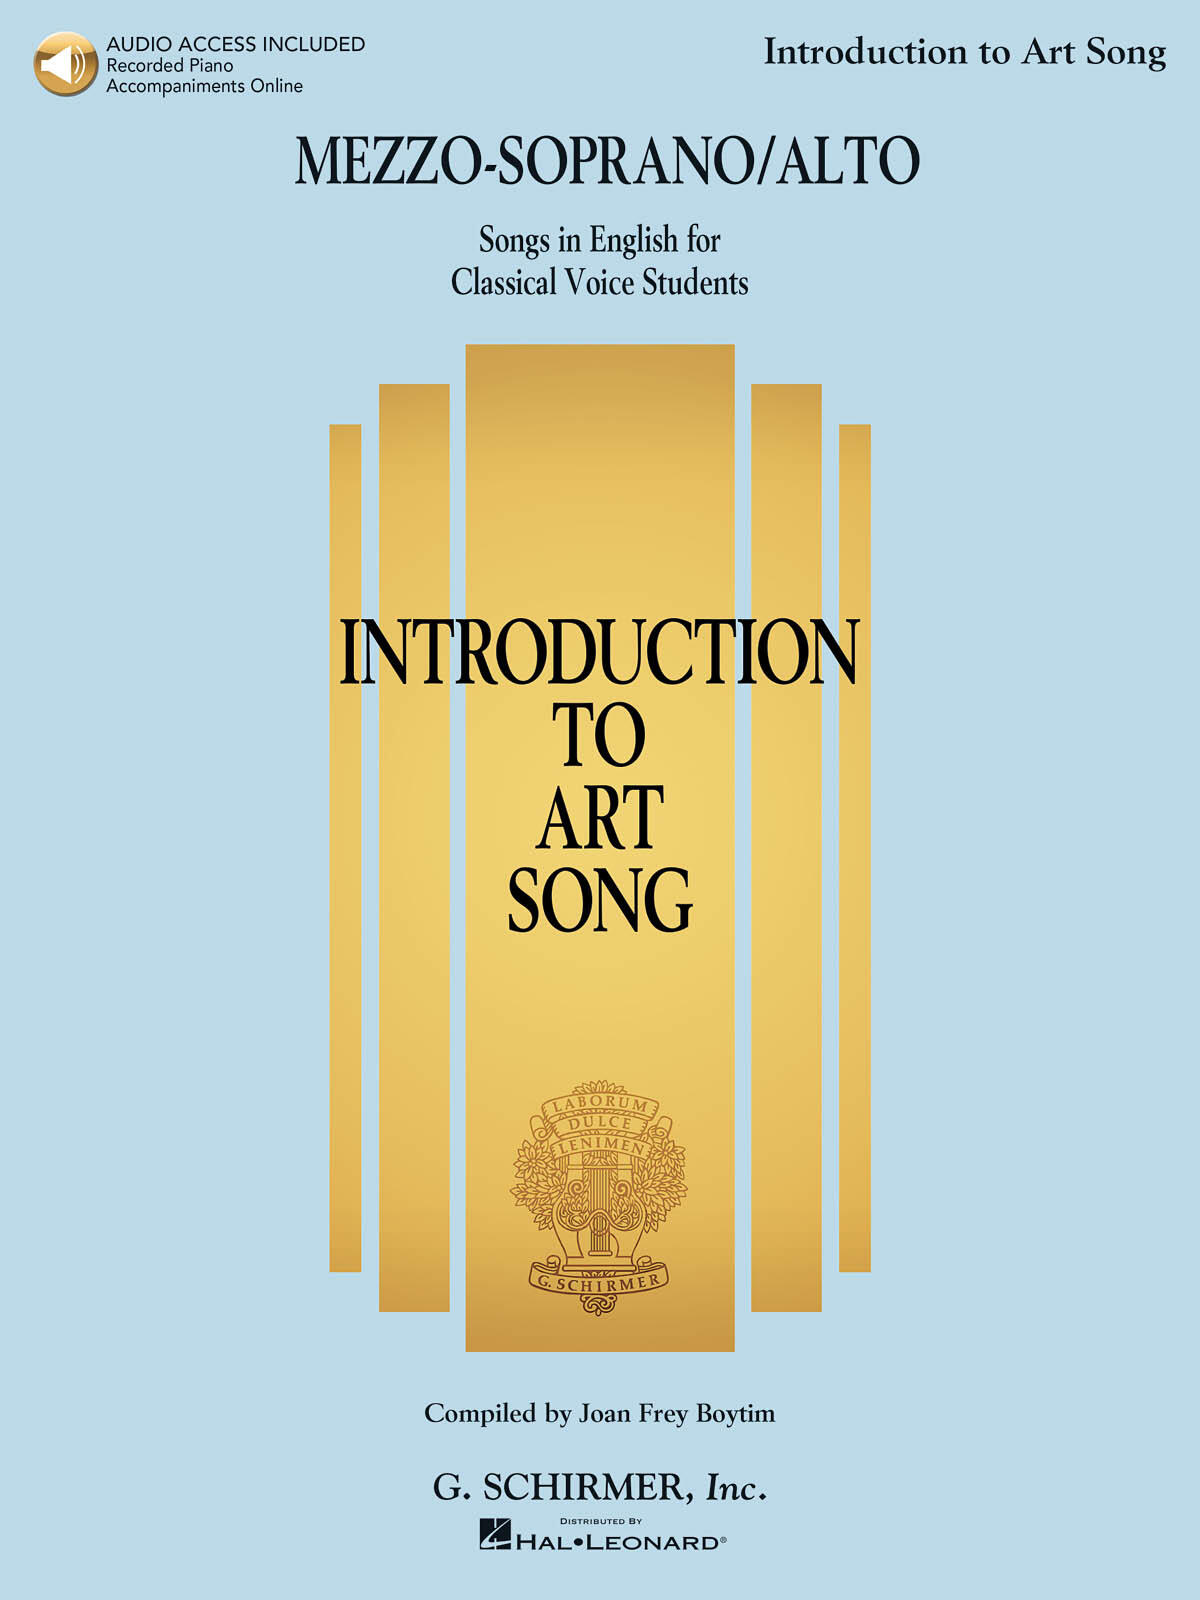 Introduction to Art Song for Mezzo-Soprano or Alto Songs in English for Classical Voice Students  Joan Frey Boytim Mezzo-Soprano and Piano : photo 1